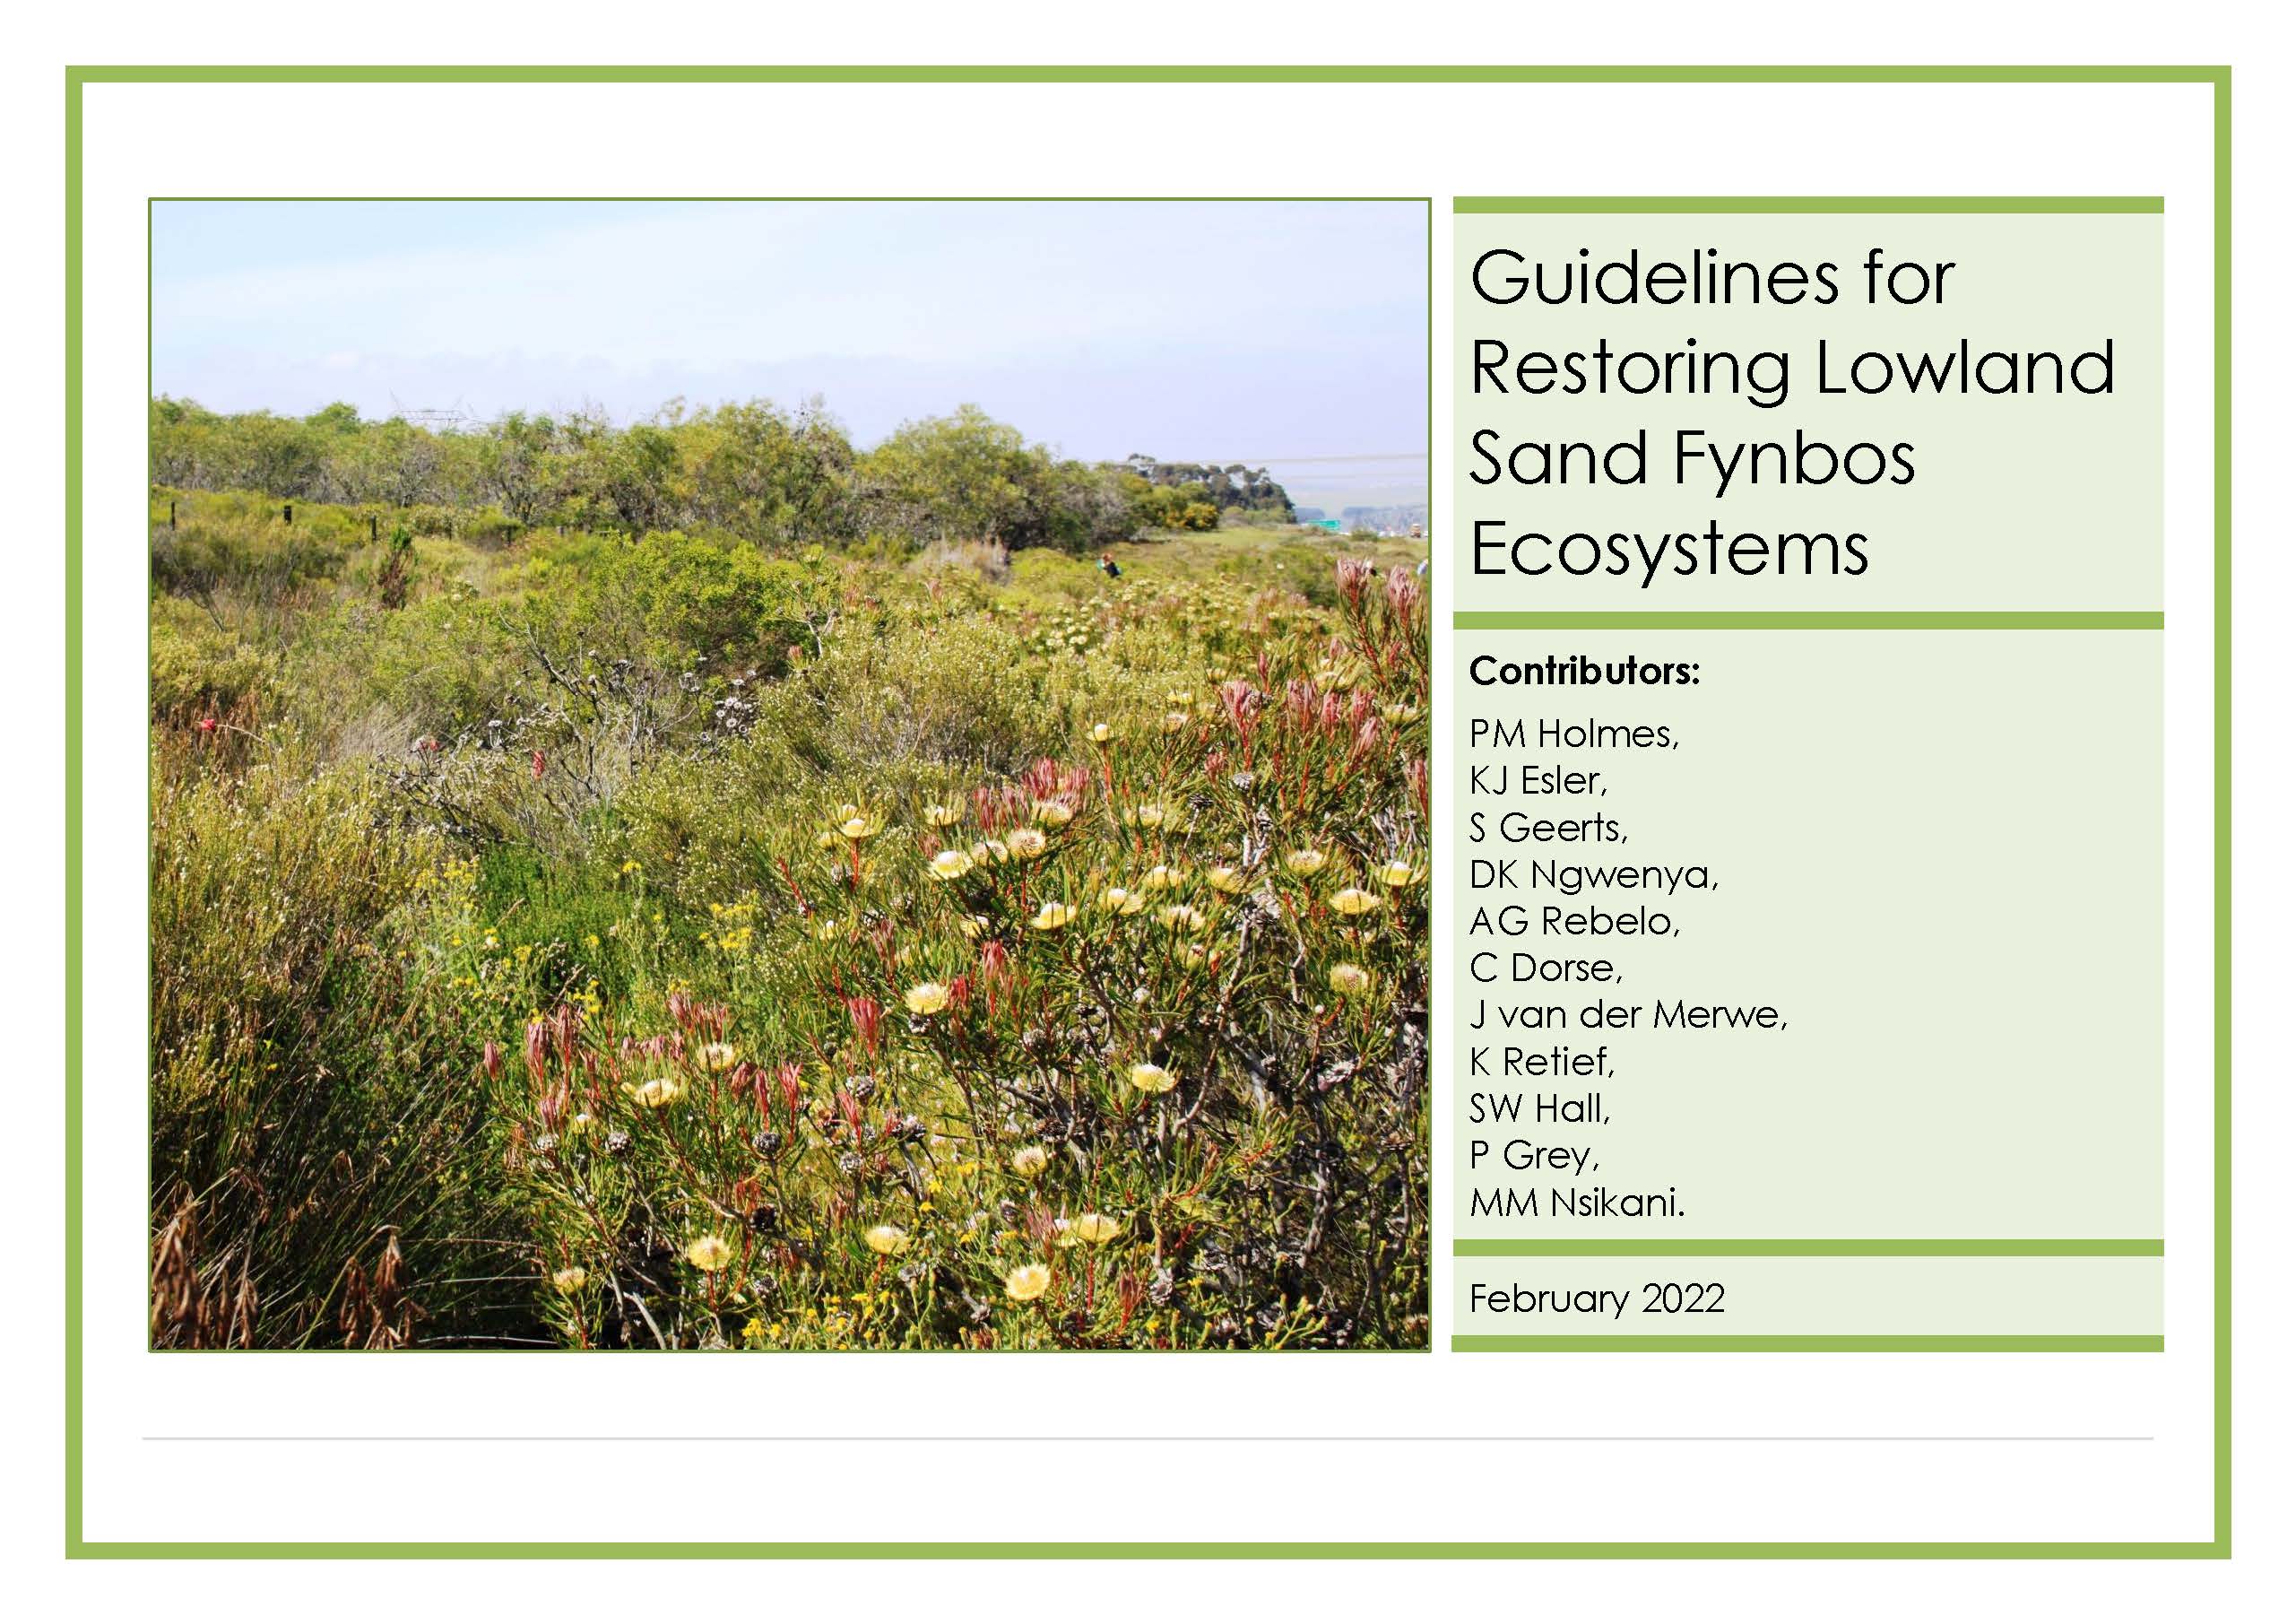 Restoring Lowland Sand Fynbos – guidelines hot off the press